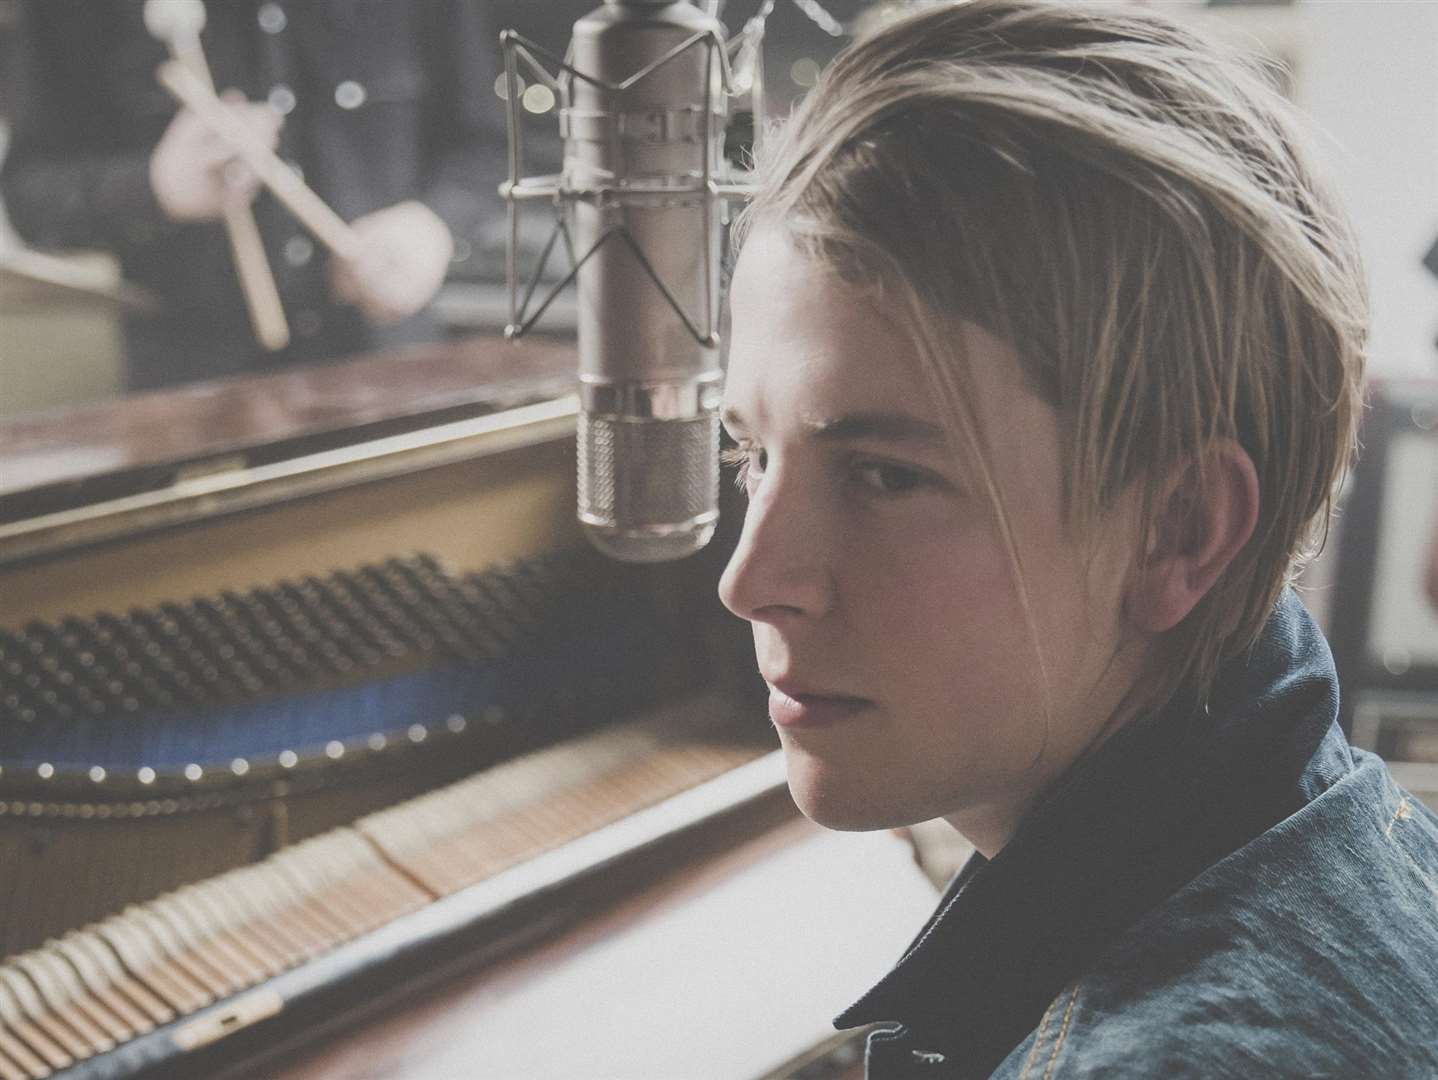 Musician Tom Odell is among names mentioned by organisers